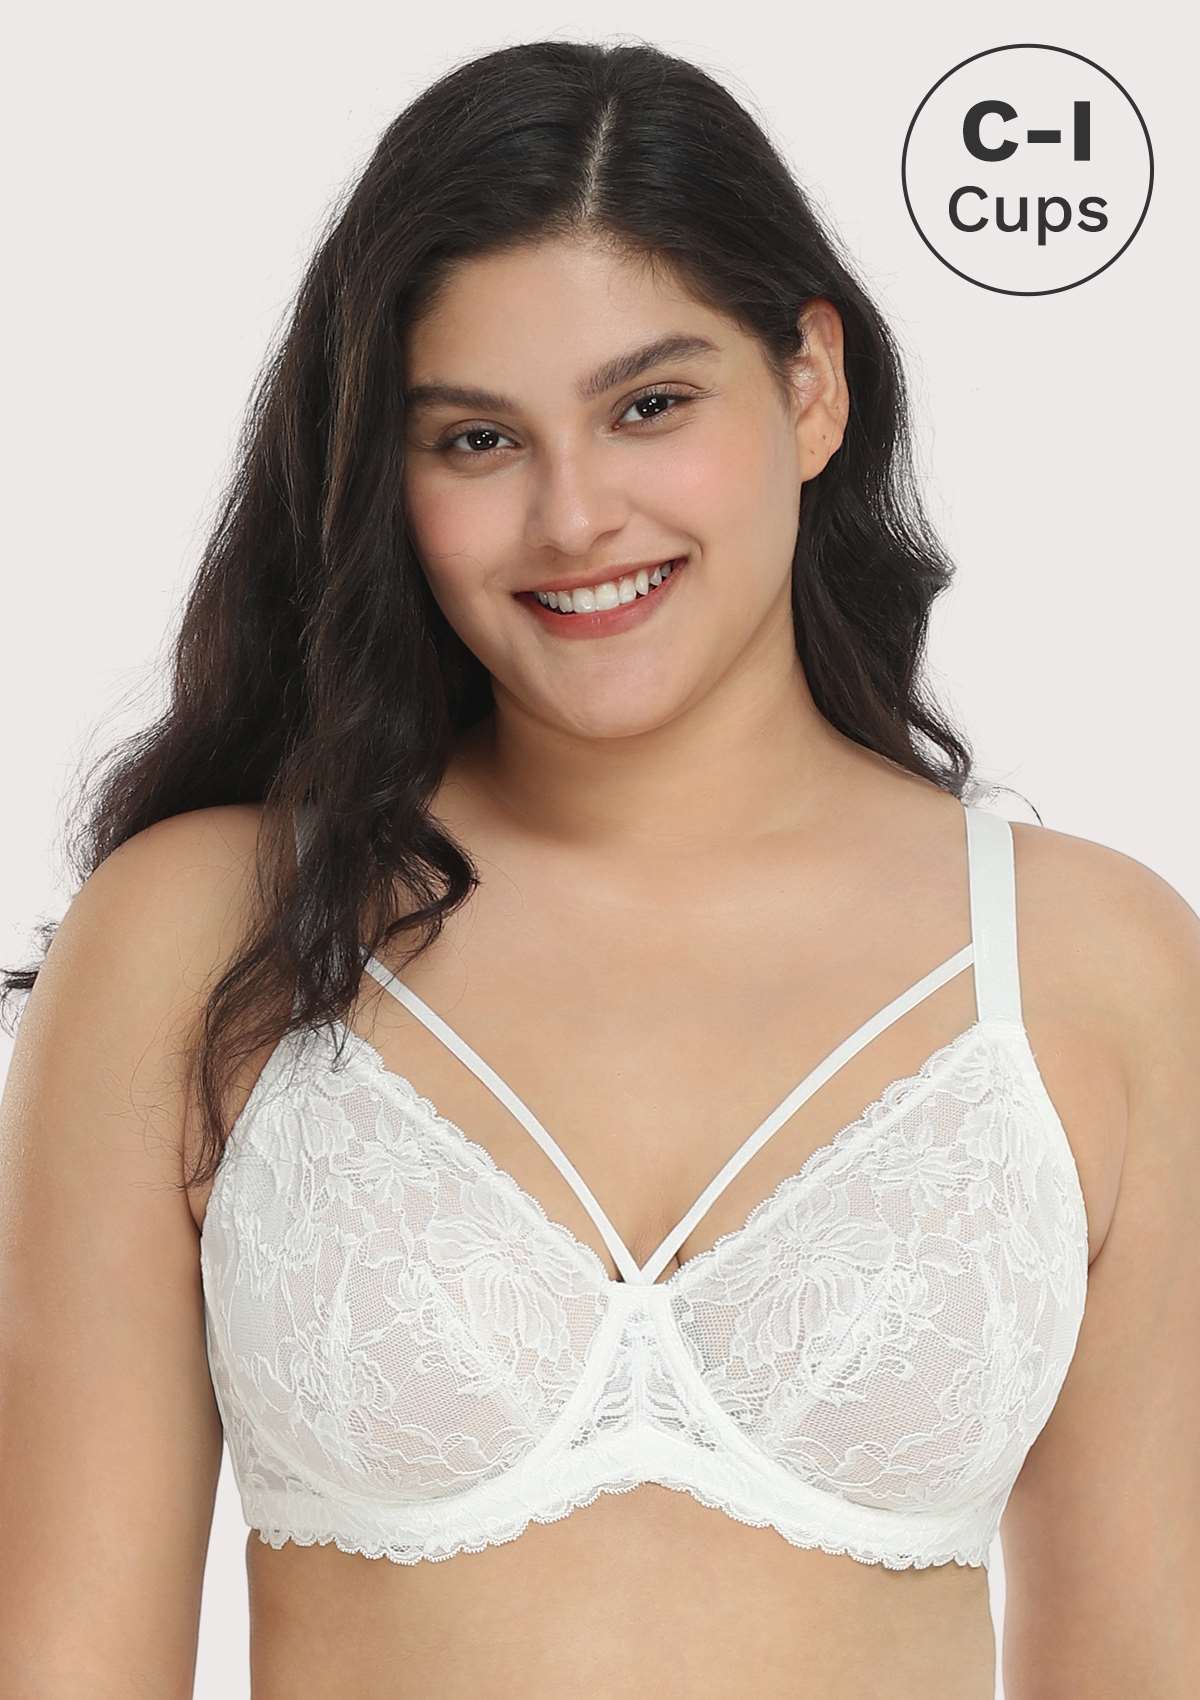 46ddd Bras, Lightweight fabric—It makes you feeling nothing, we